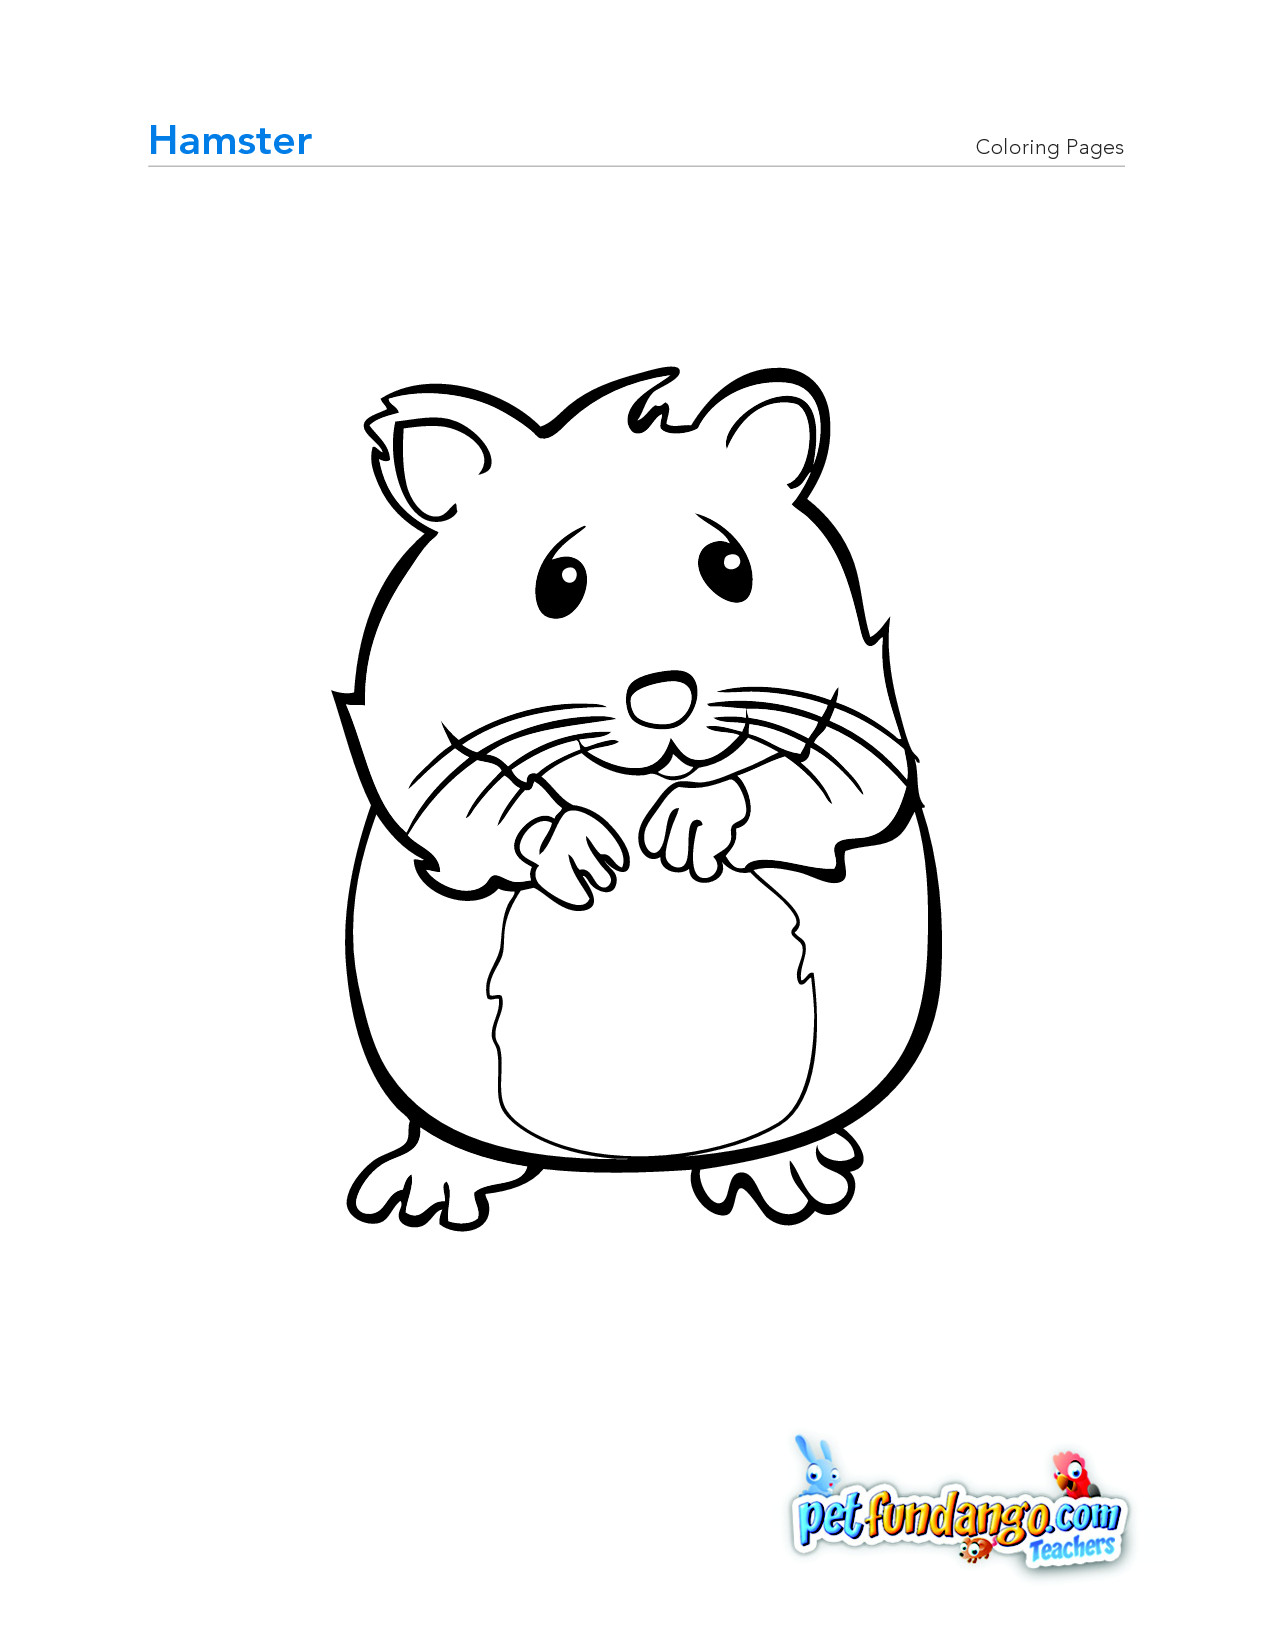 Baby Hamster Coloring Pages
 Hamster Coloring Page